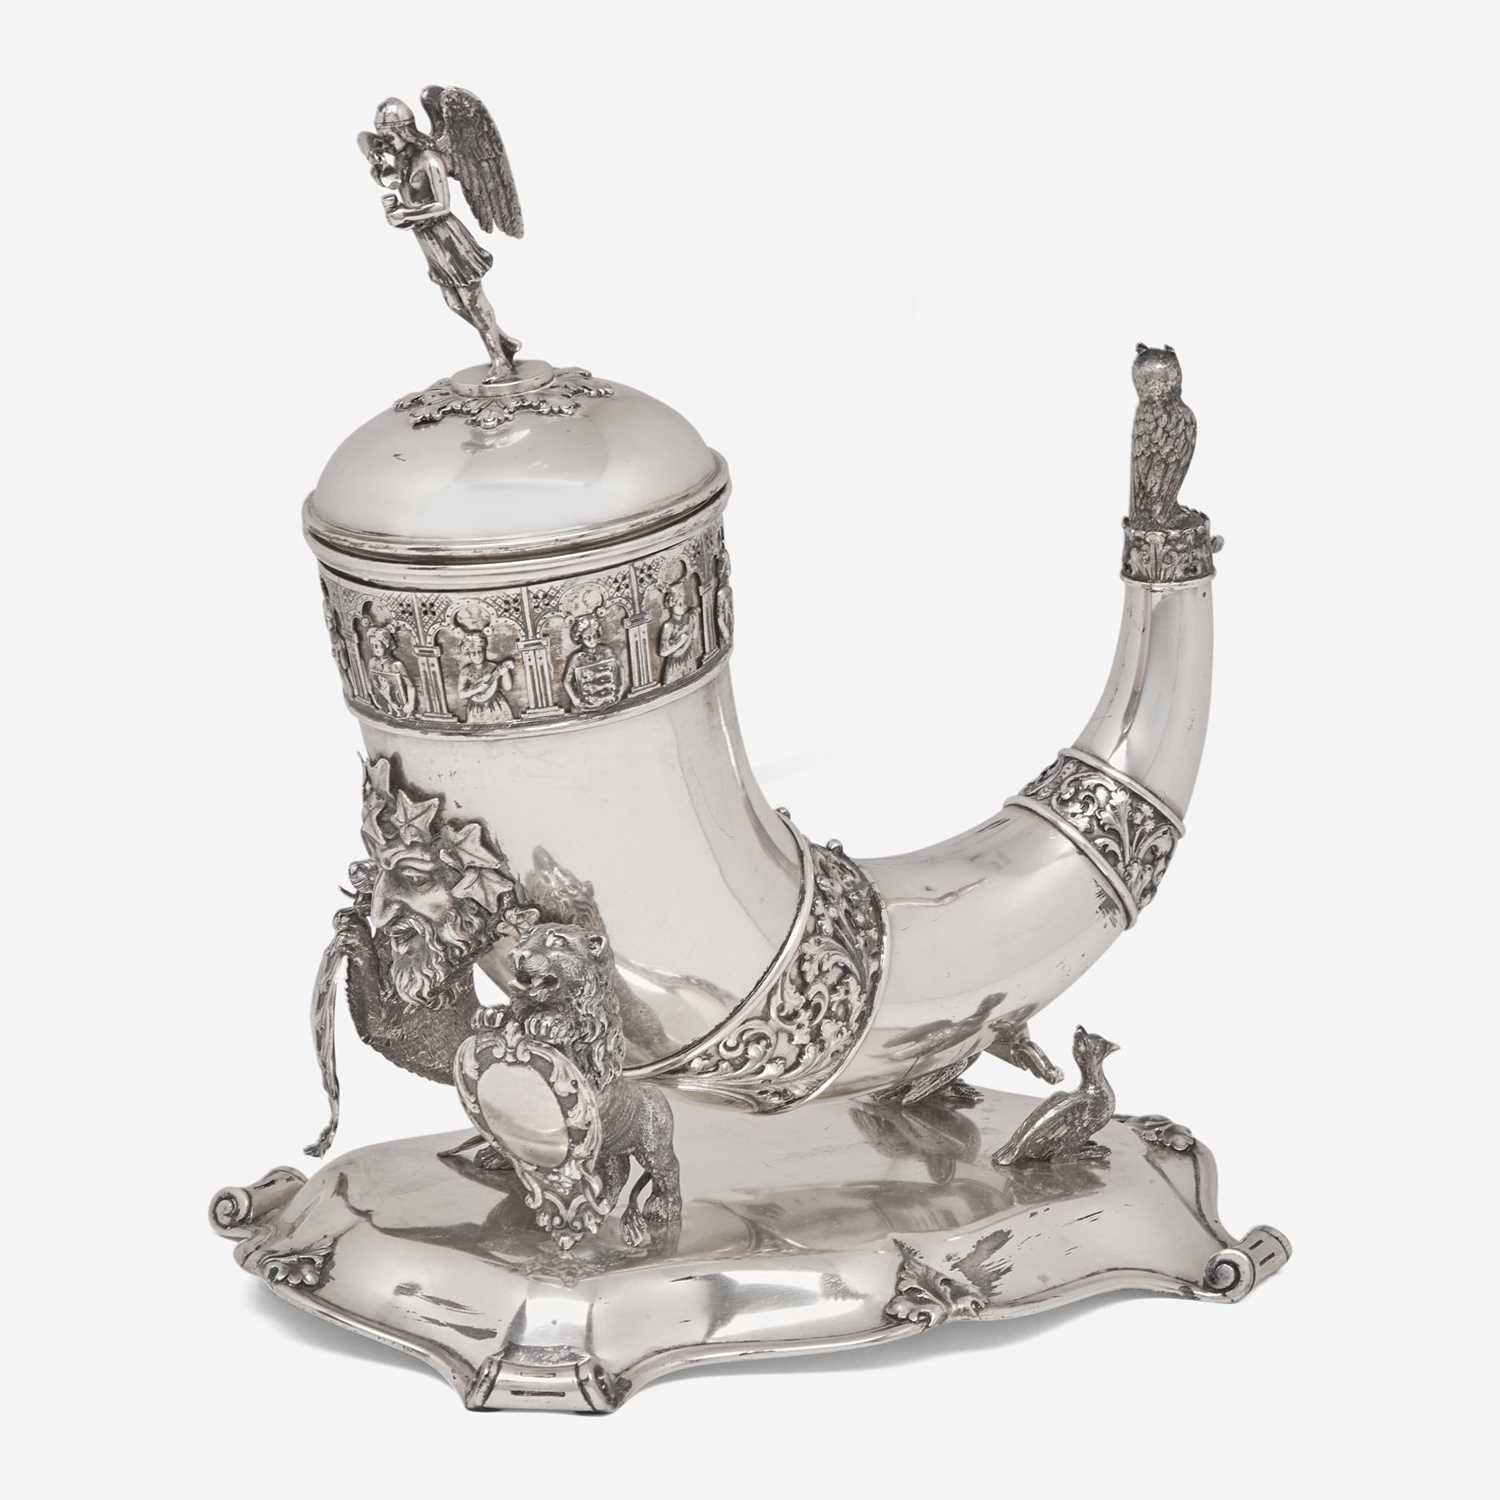 Lot 46 - A Danish silver covered drinking horn on stand